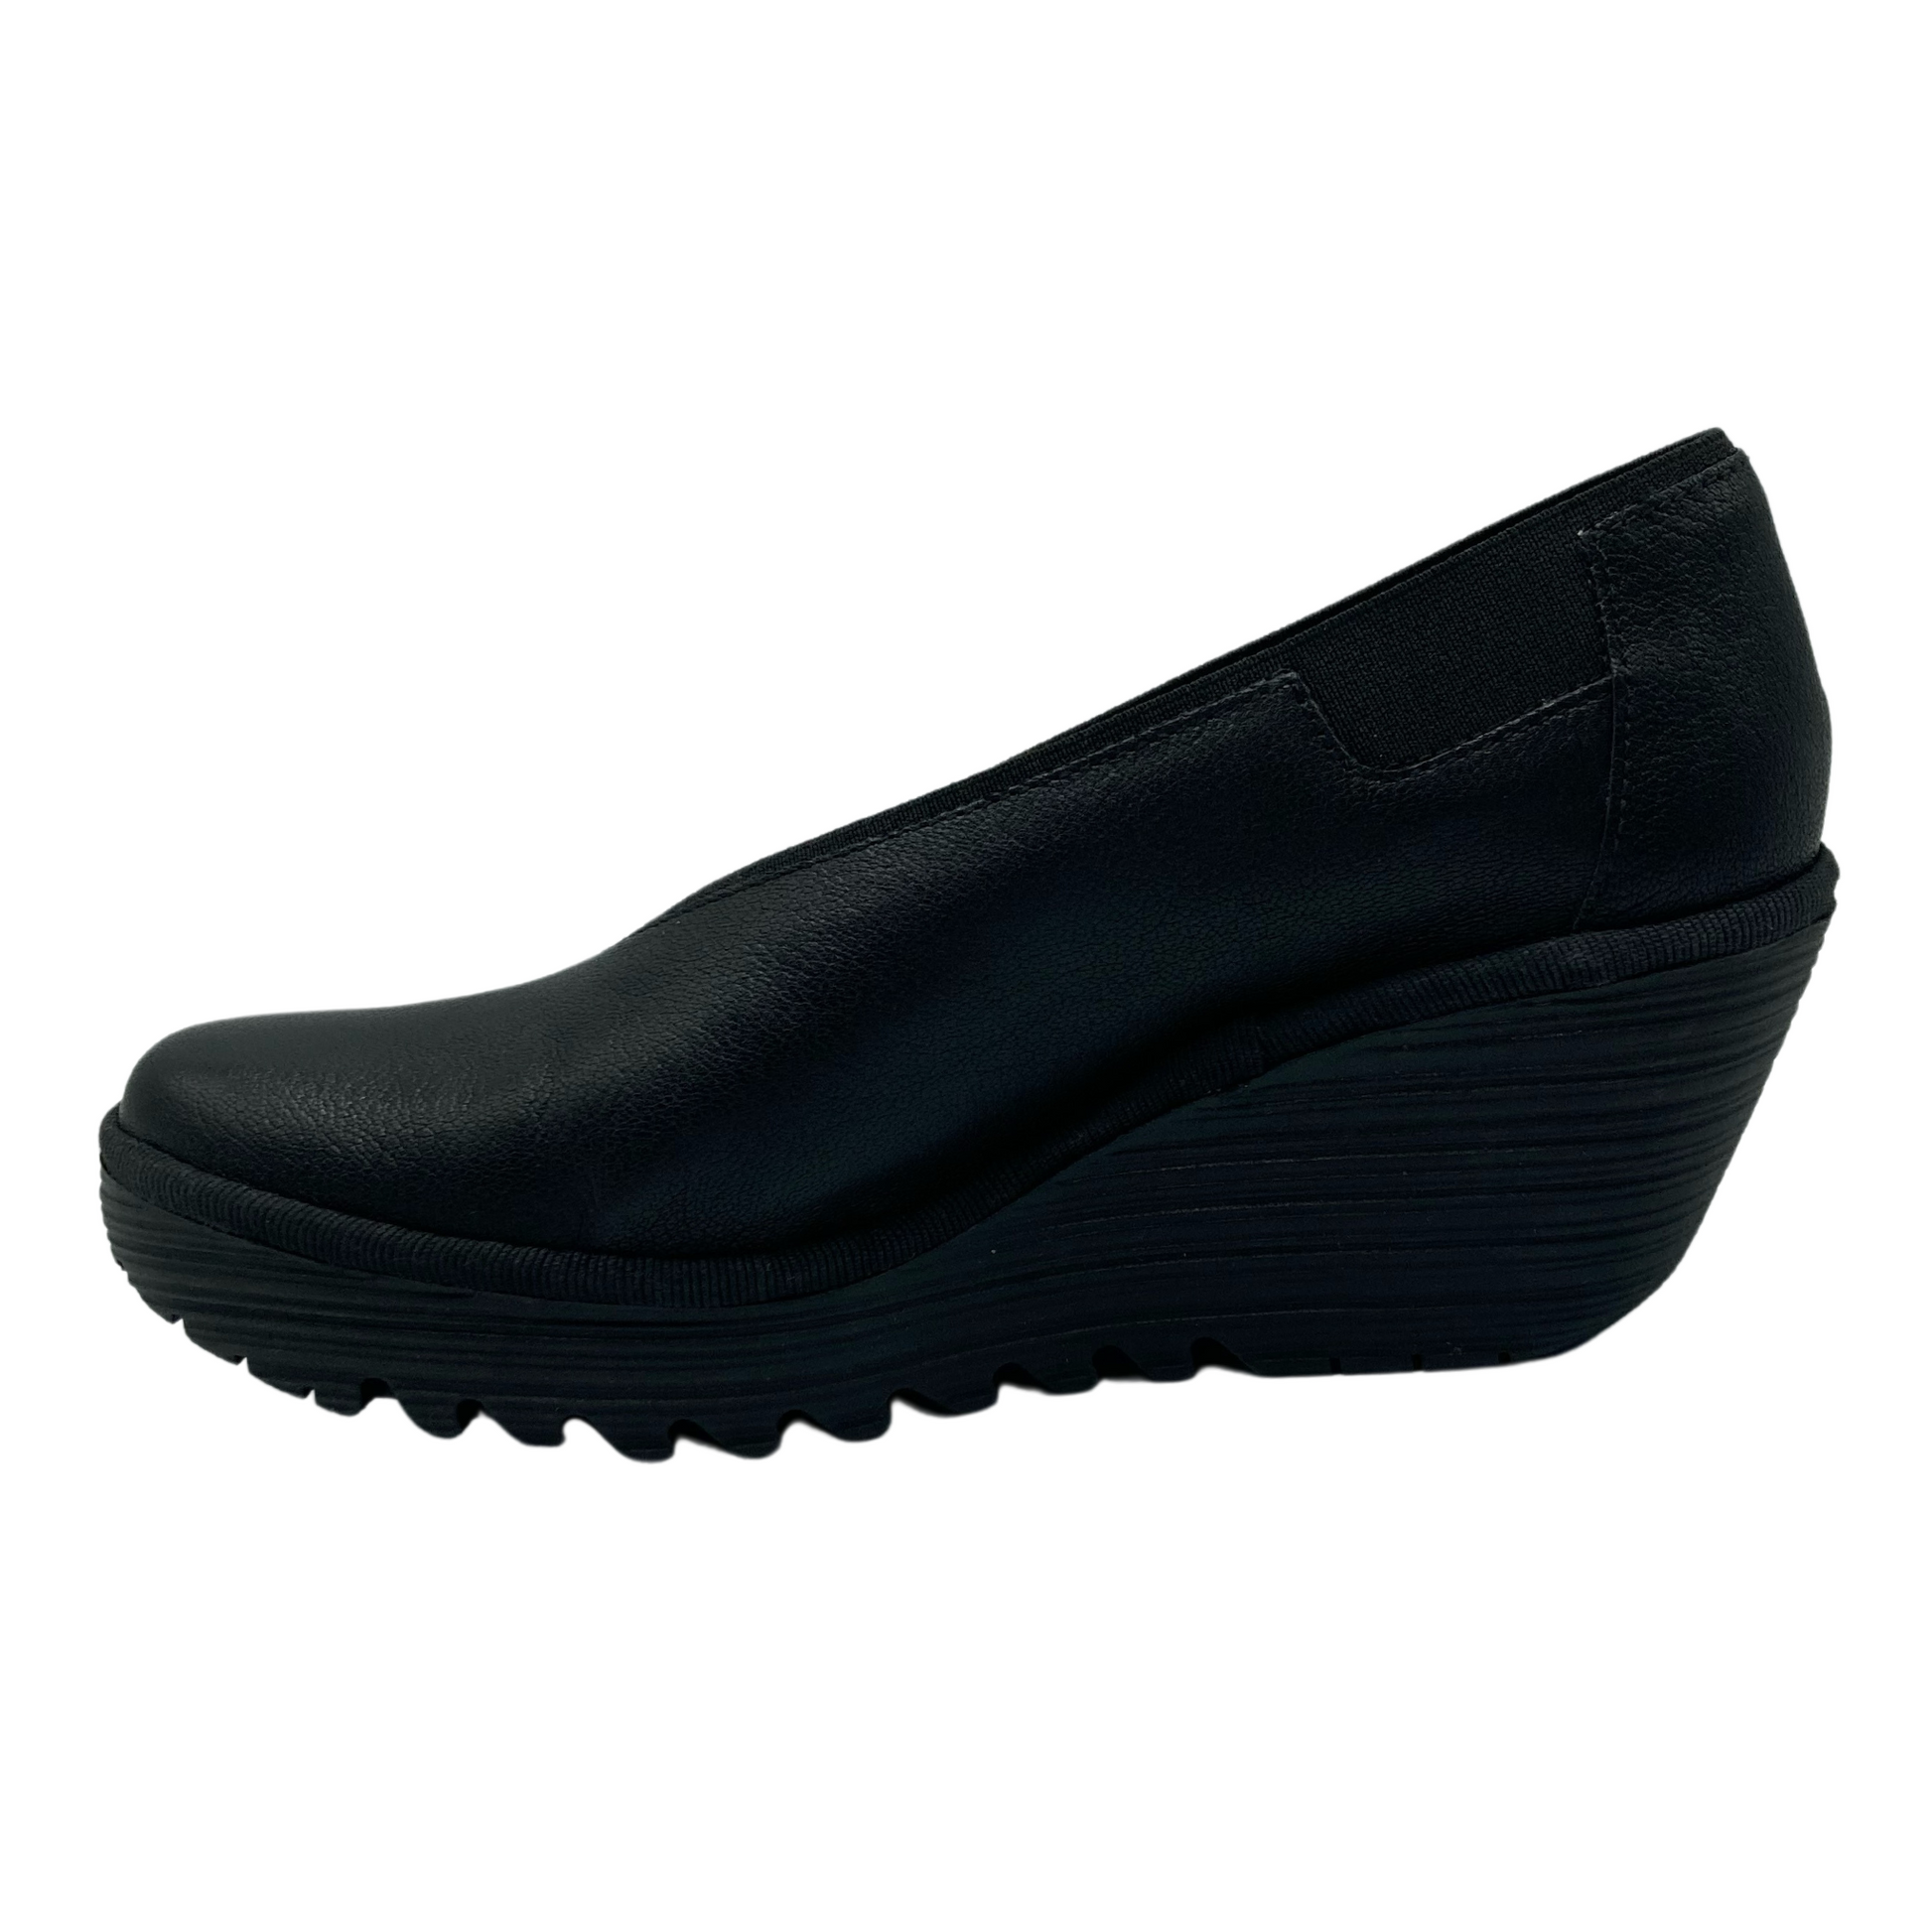 Inner side view of wedge heel with black rubber bottom